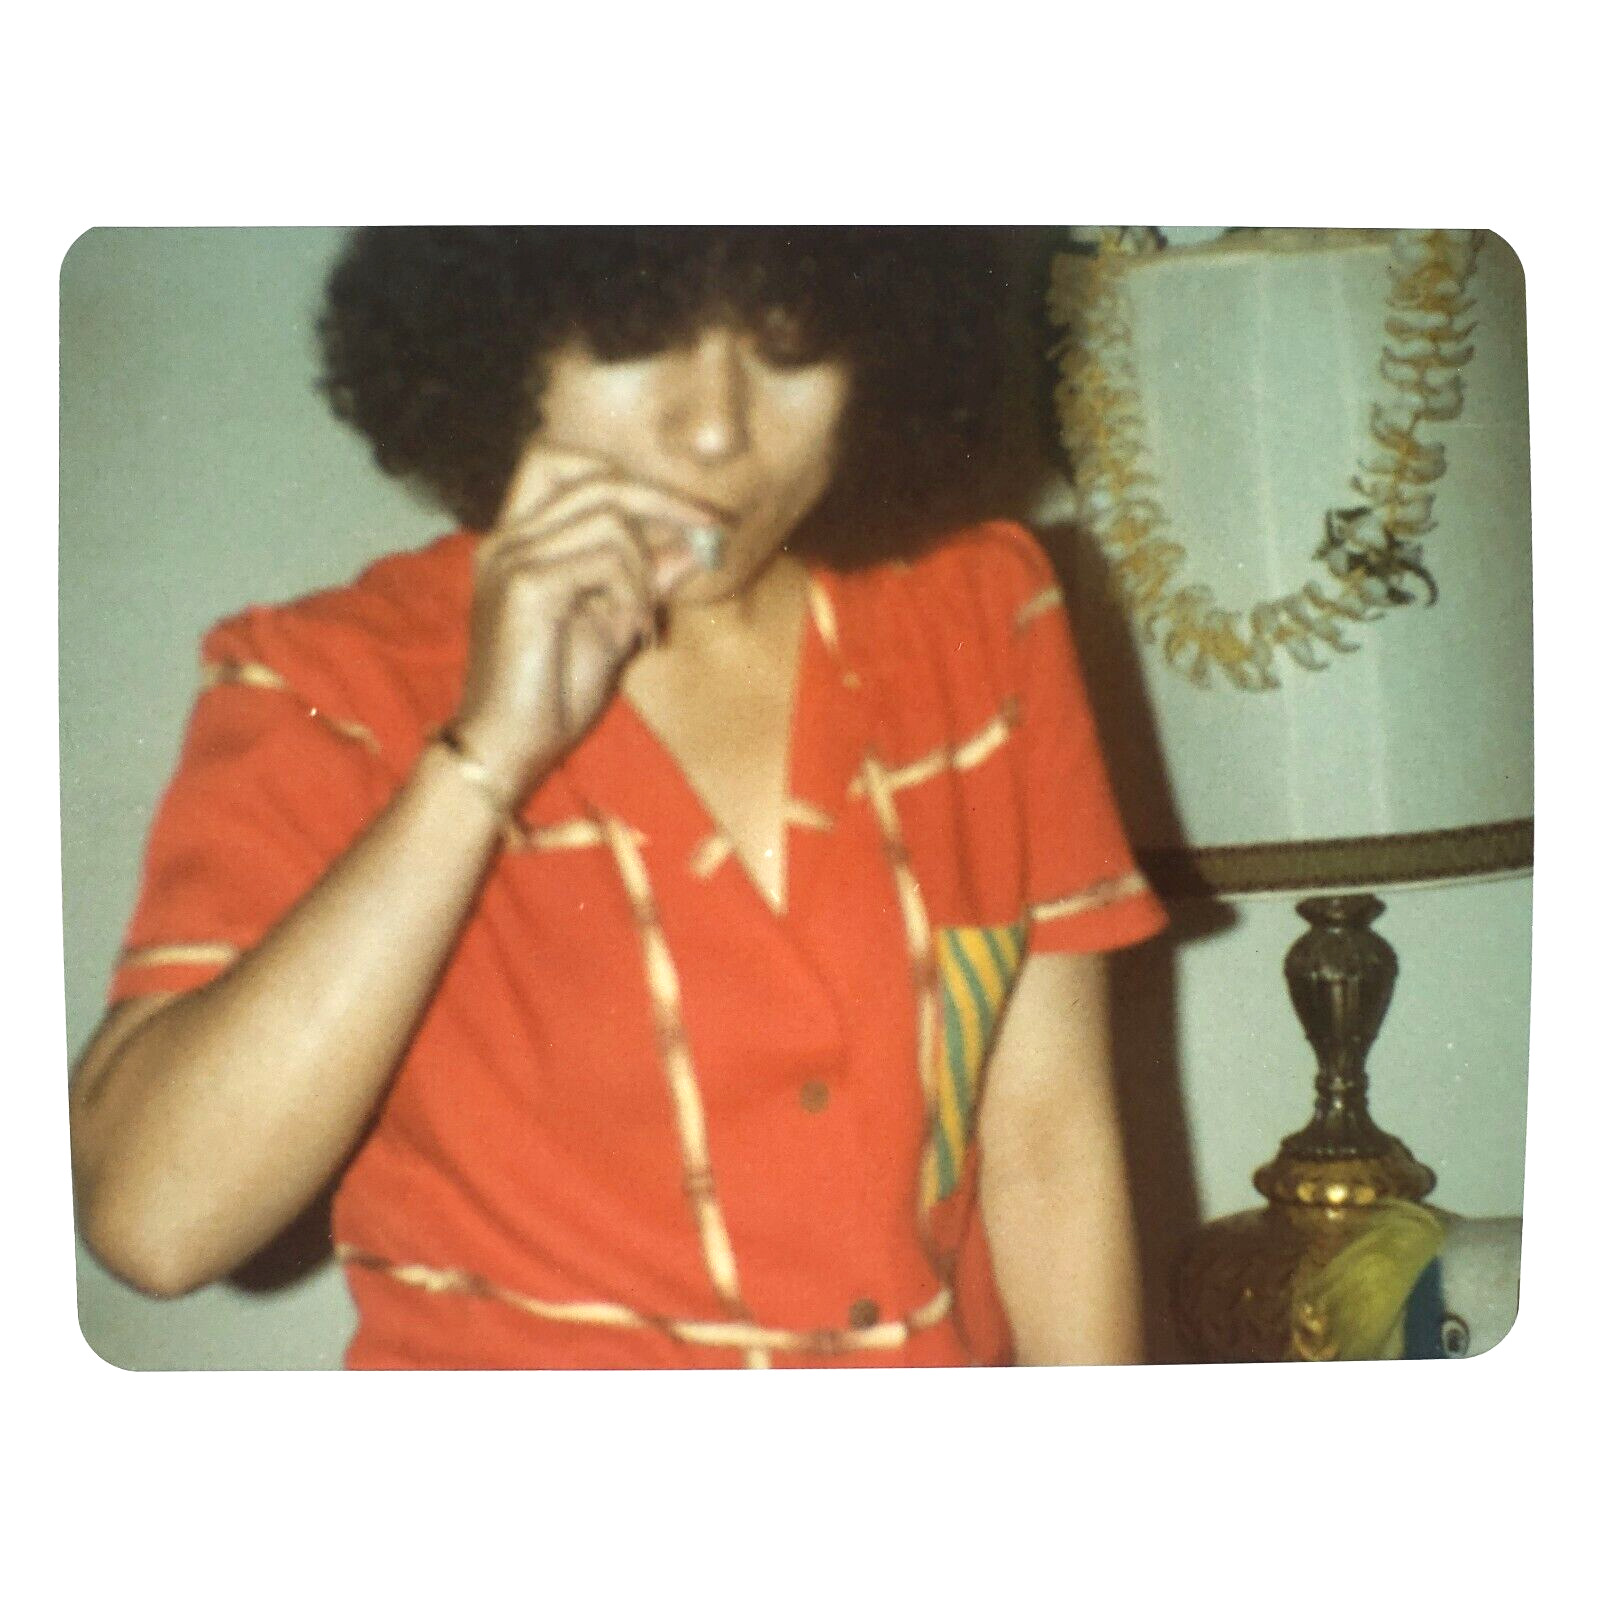 Candid Woman Smoking Joint Photo 1980s Curly-Haired Stoner Found Snapshot A4436